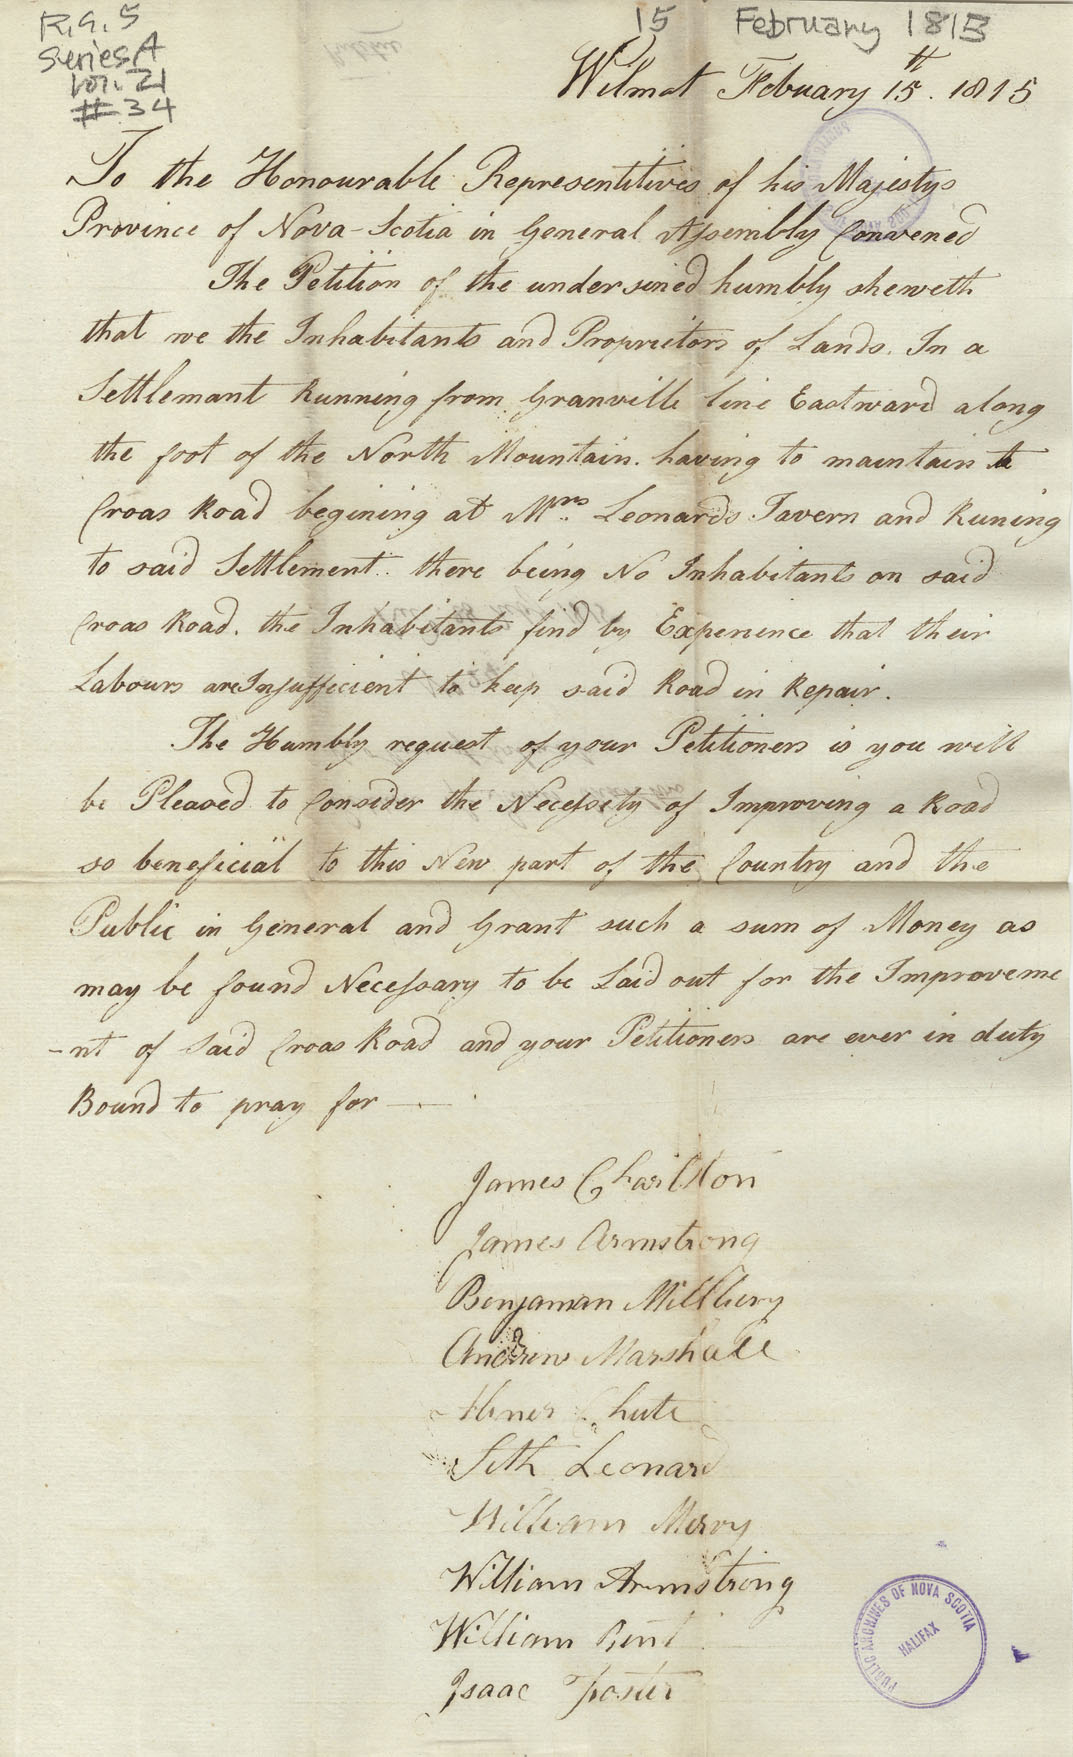 assembly : Petition of James Charlton and other inhabitants of a settlement in the township of Granville, asking for a grant to help them maintain the 